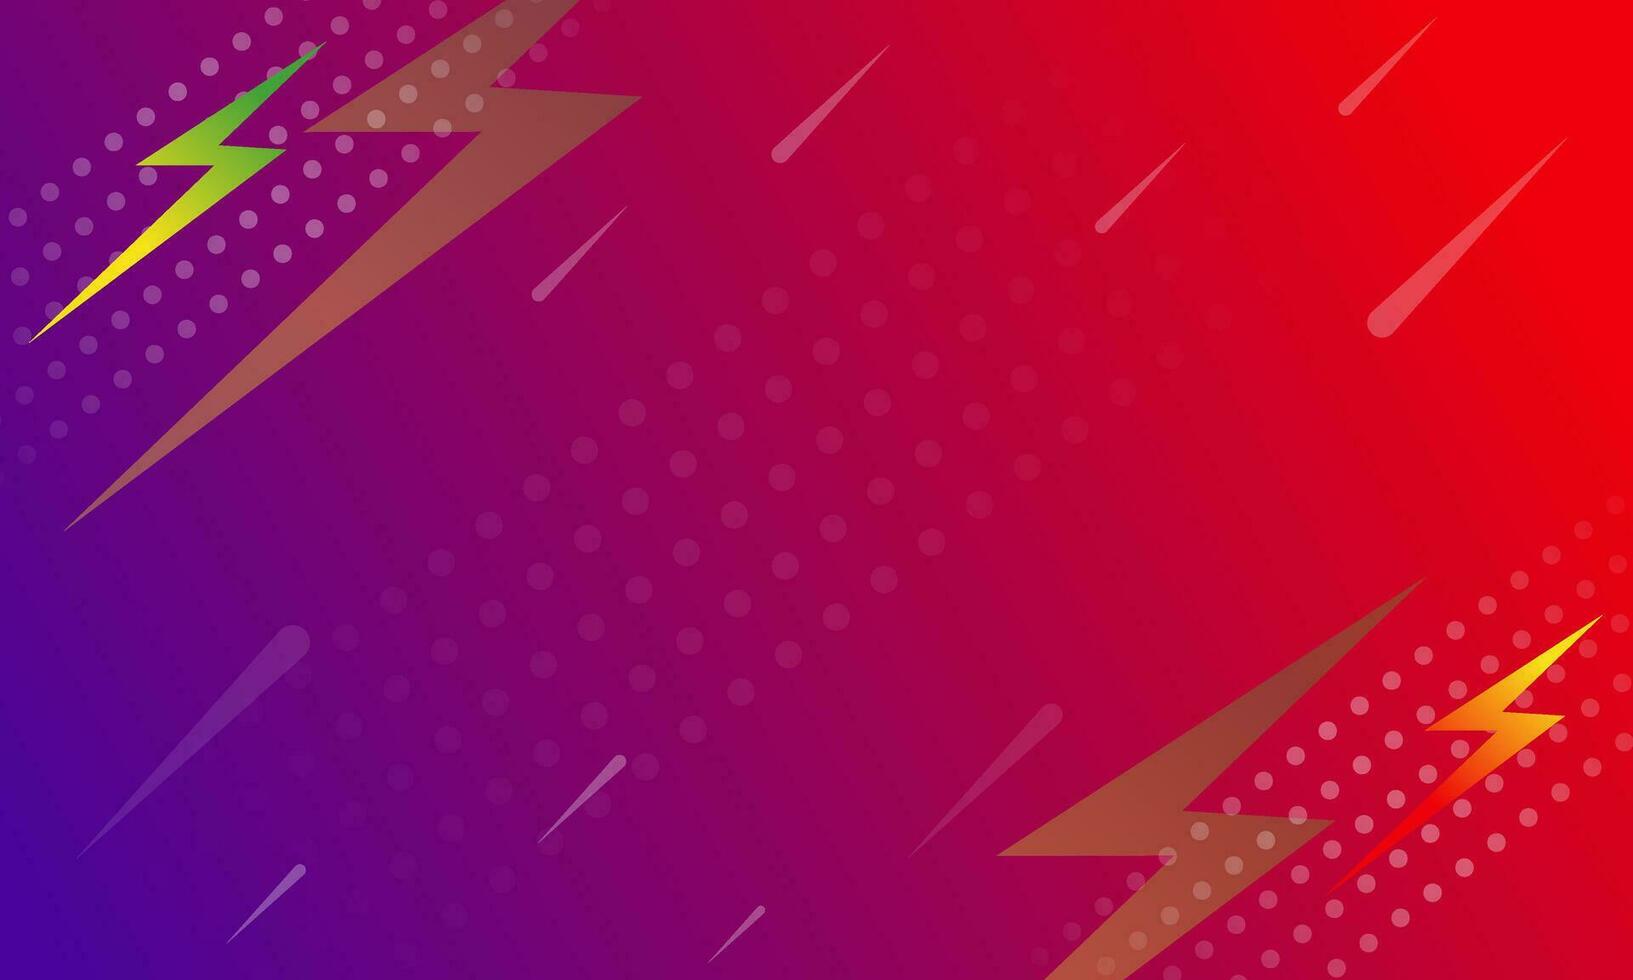 Modern gradient background with comic style and dots design concept vector